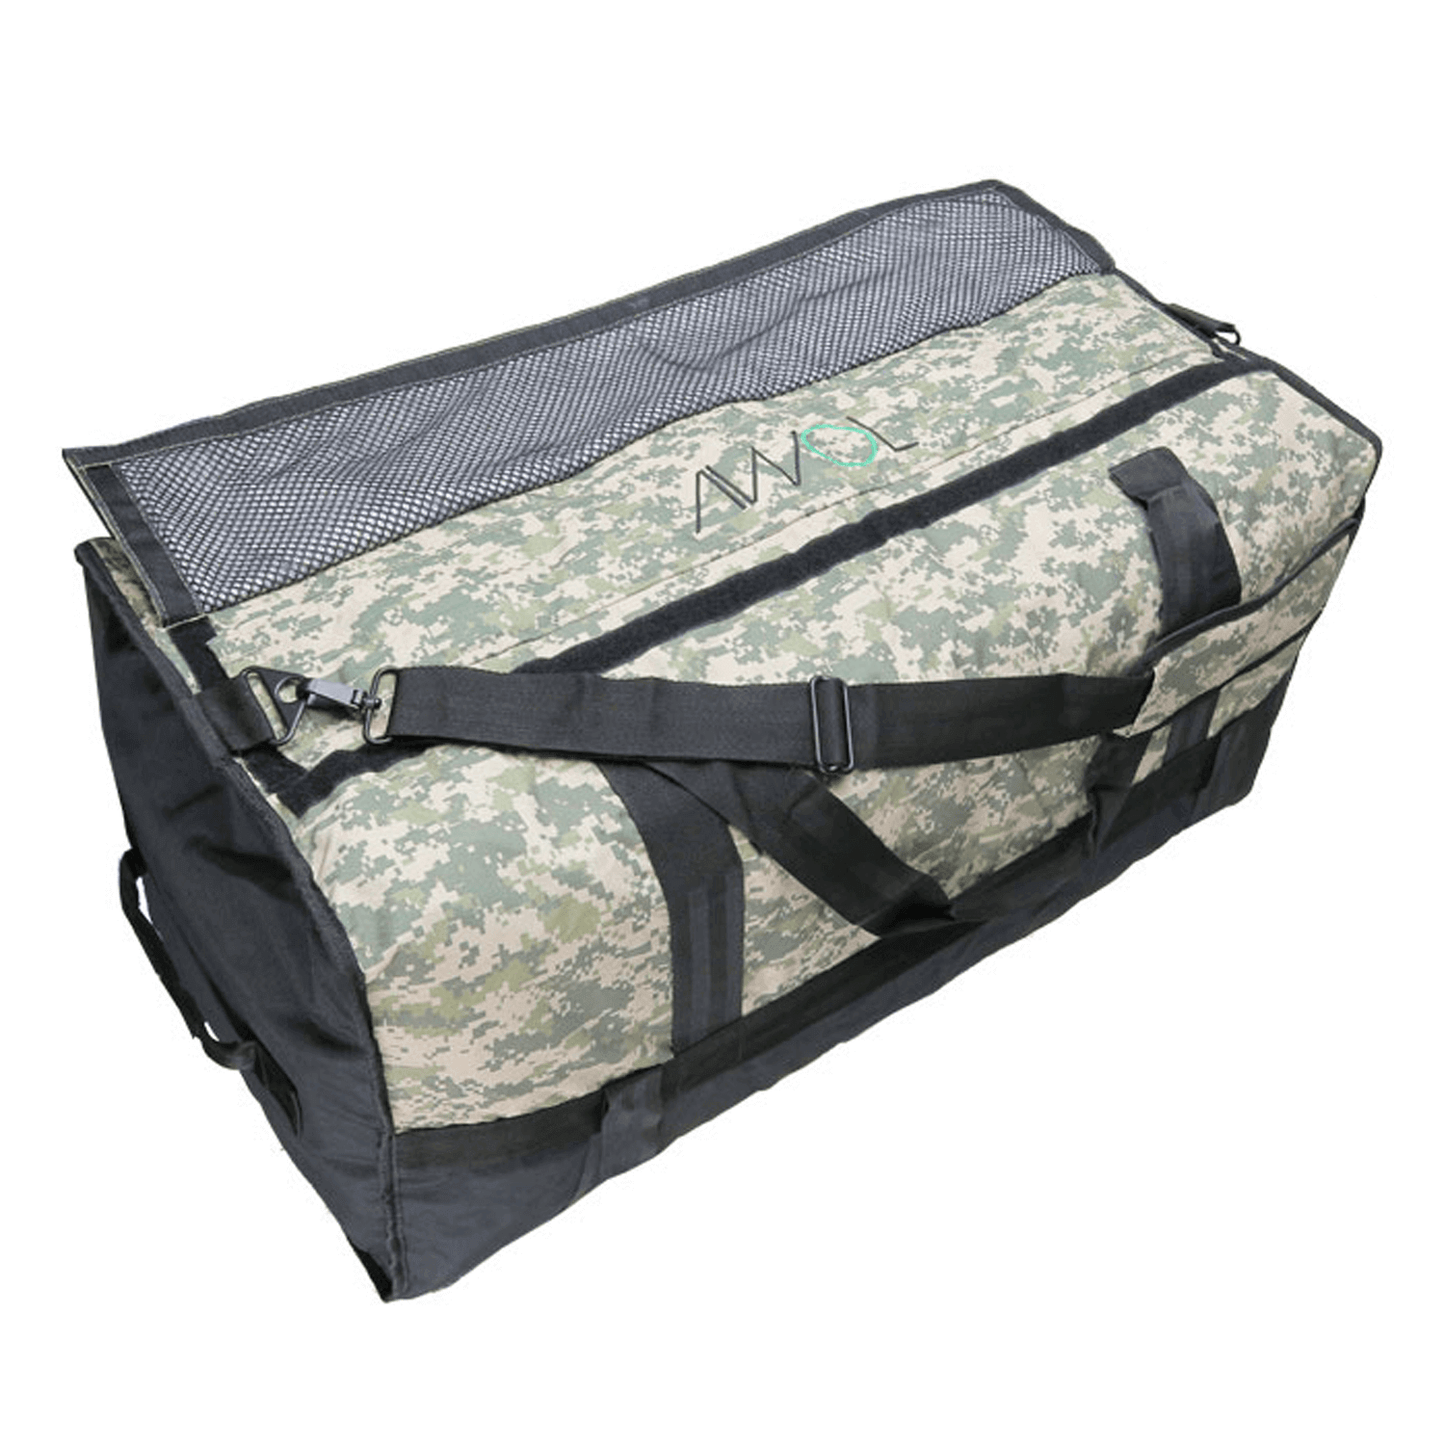 AWOL DAILY XX-Large Camo Square Bag 886162 Harvest & Extraction 853336007935